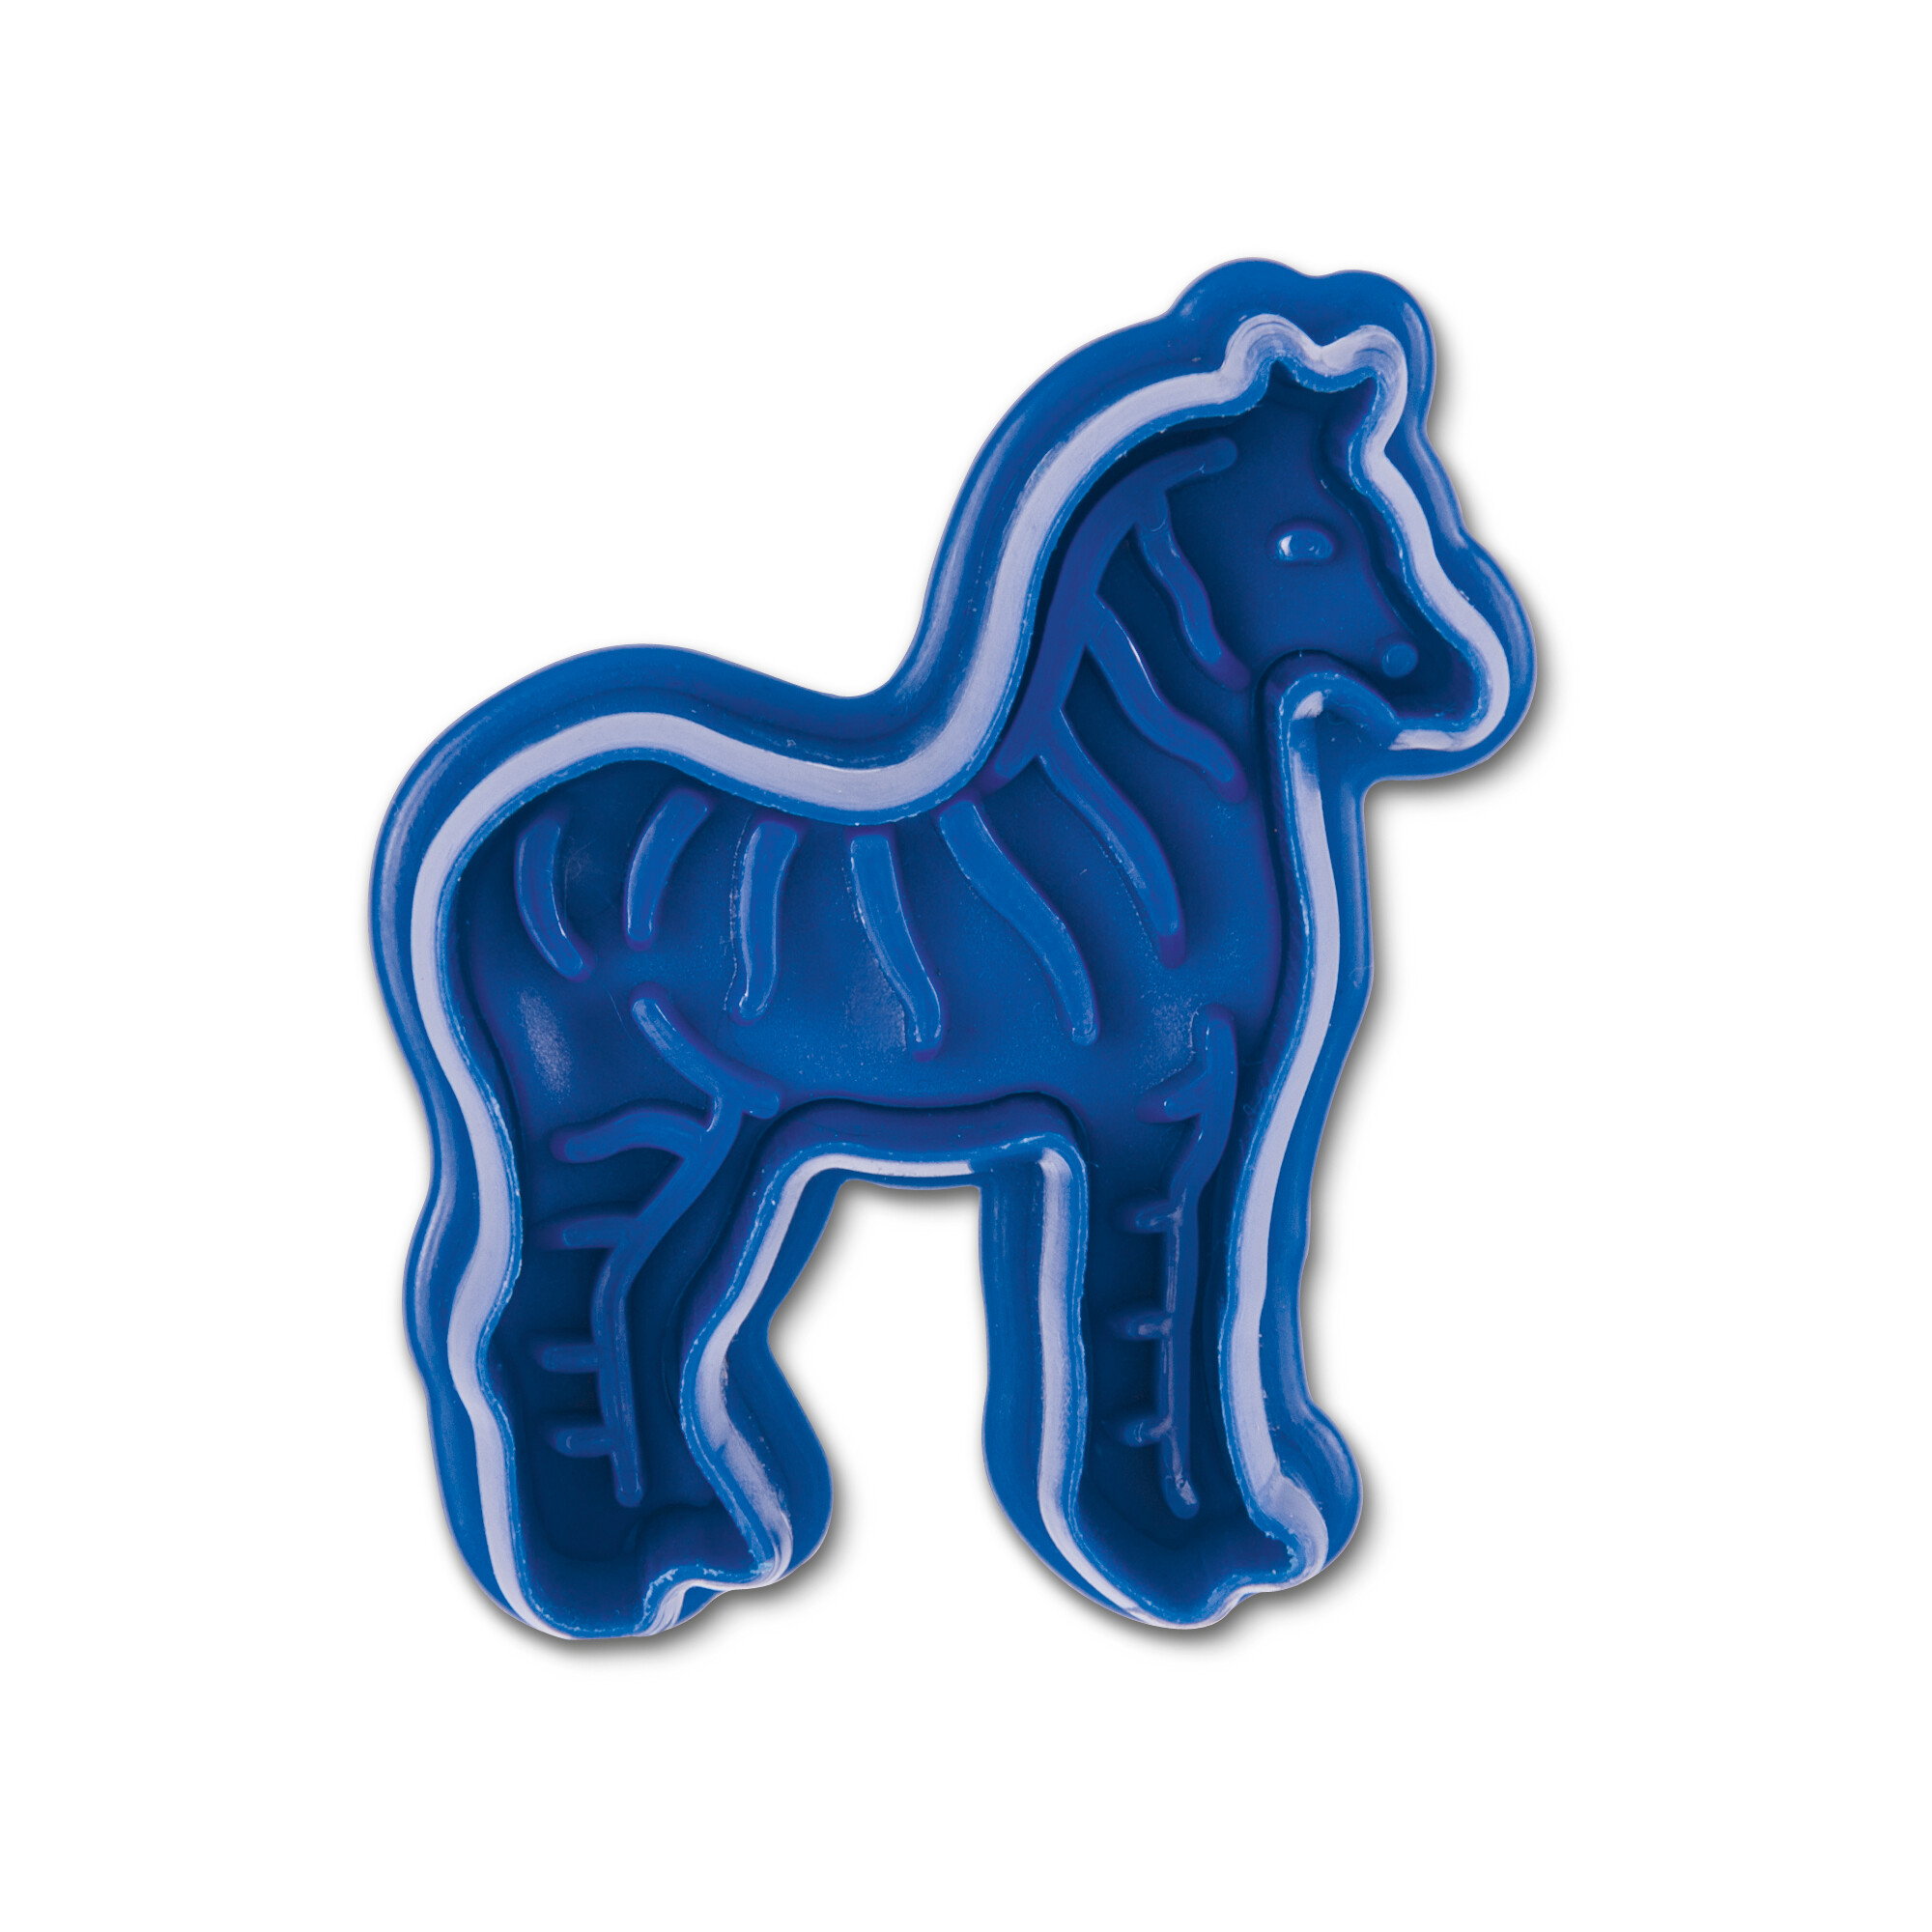 Cookie cutter with stamp and ejector – Zebra